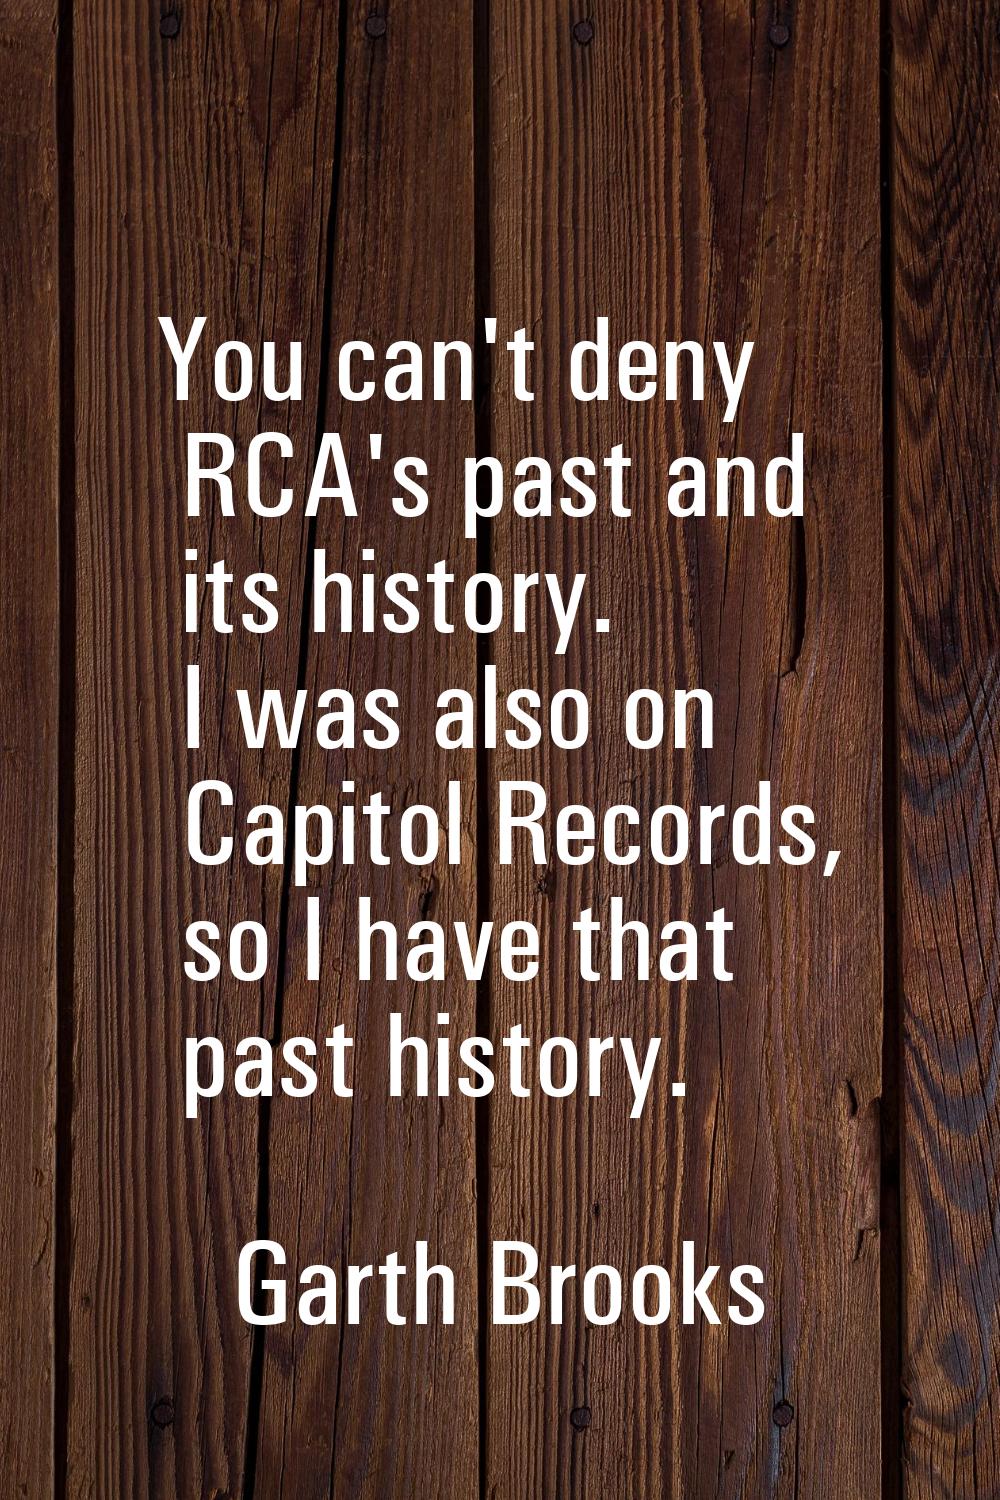 You can't deny RCA's past and its history. I was also on Capitol Records, so I have that past histo